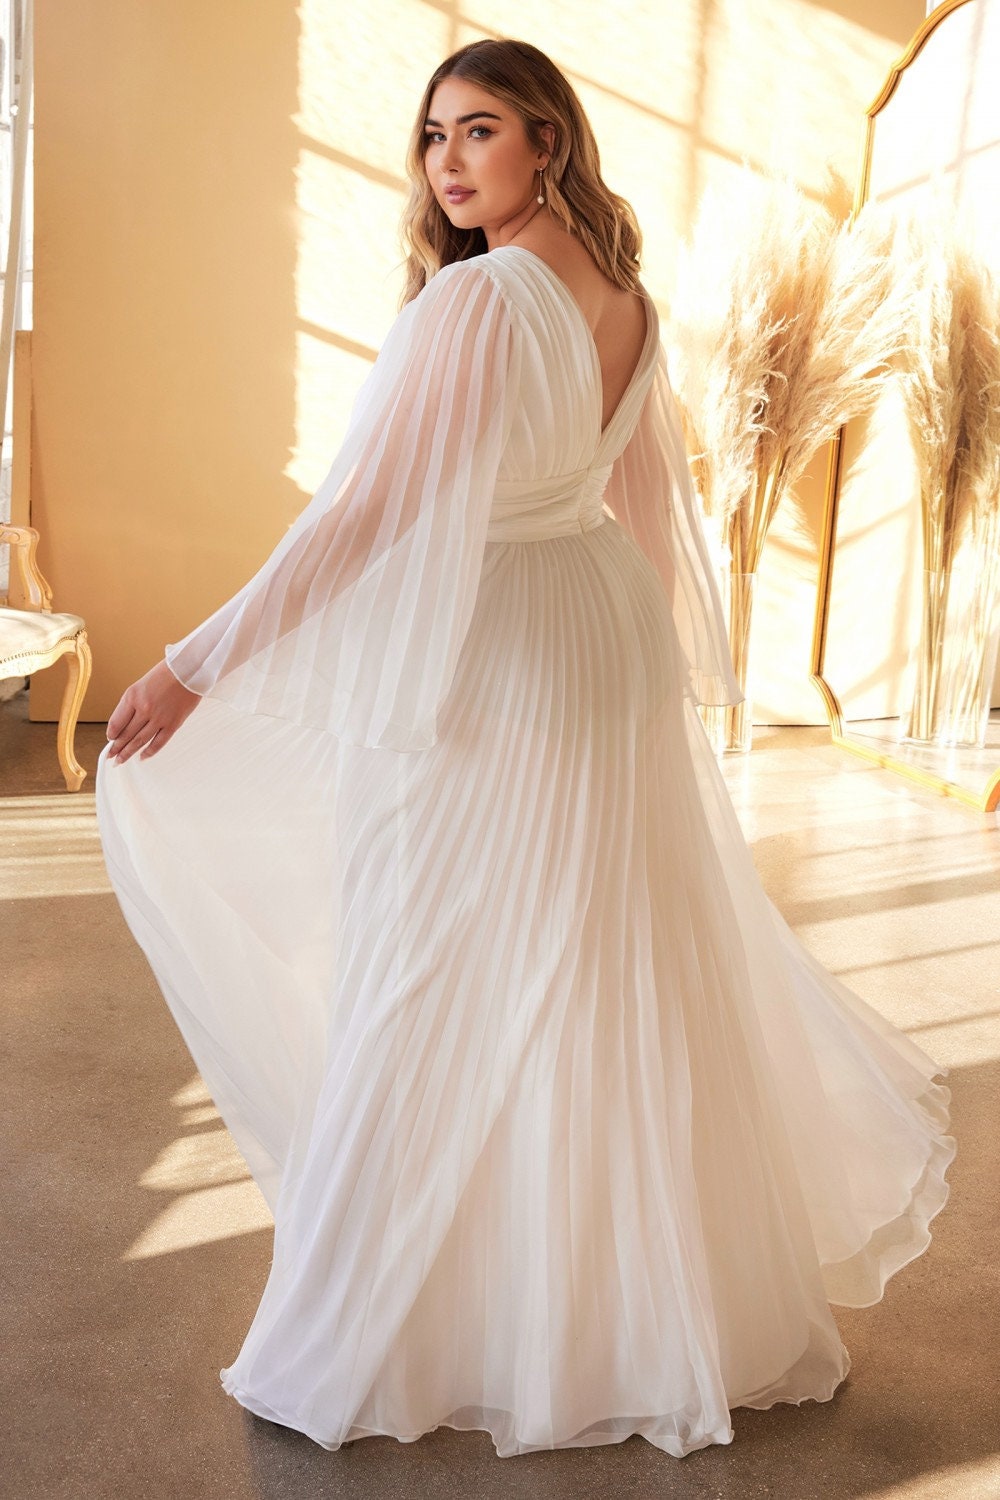 Beautiful Unique Sophisticated Long Wide Sleeve Pleated Chiffon Aline Dress V Neckline Wedding Dress Bridal Gown Open V Shape Back Pleated